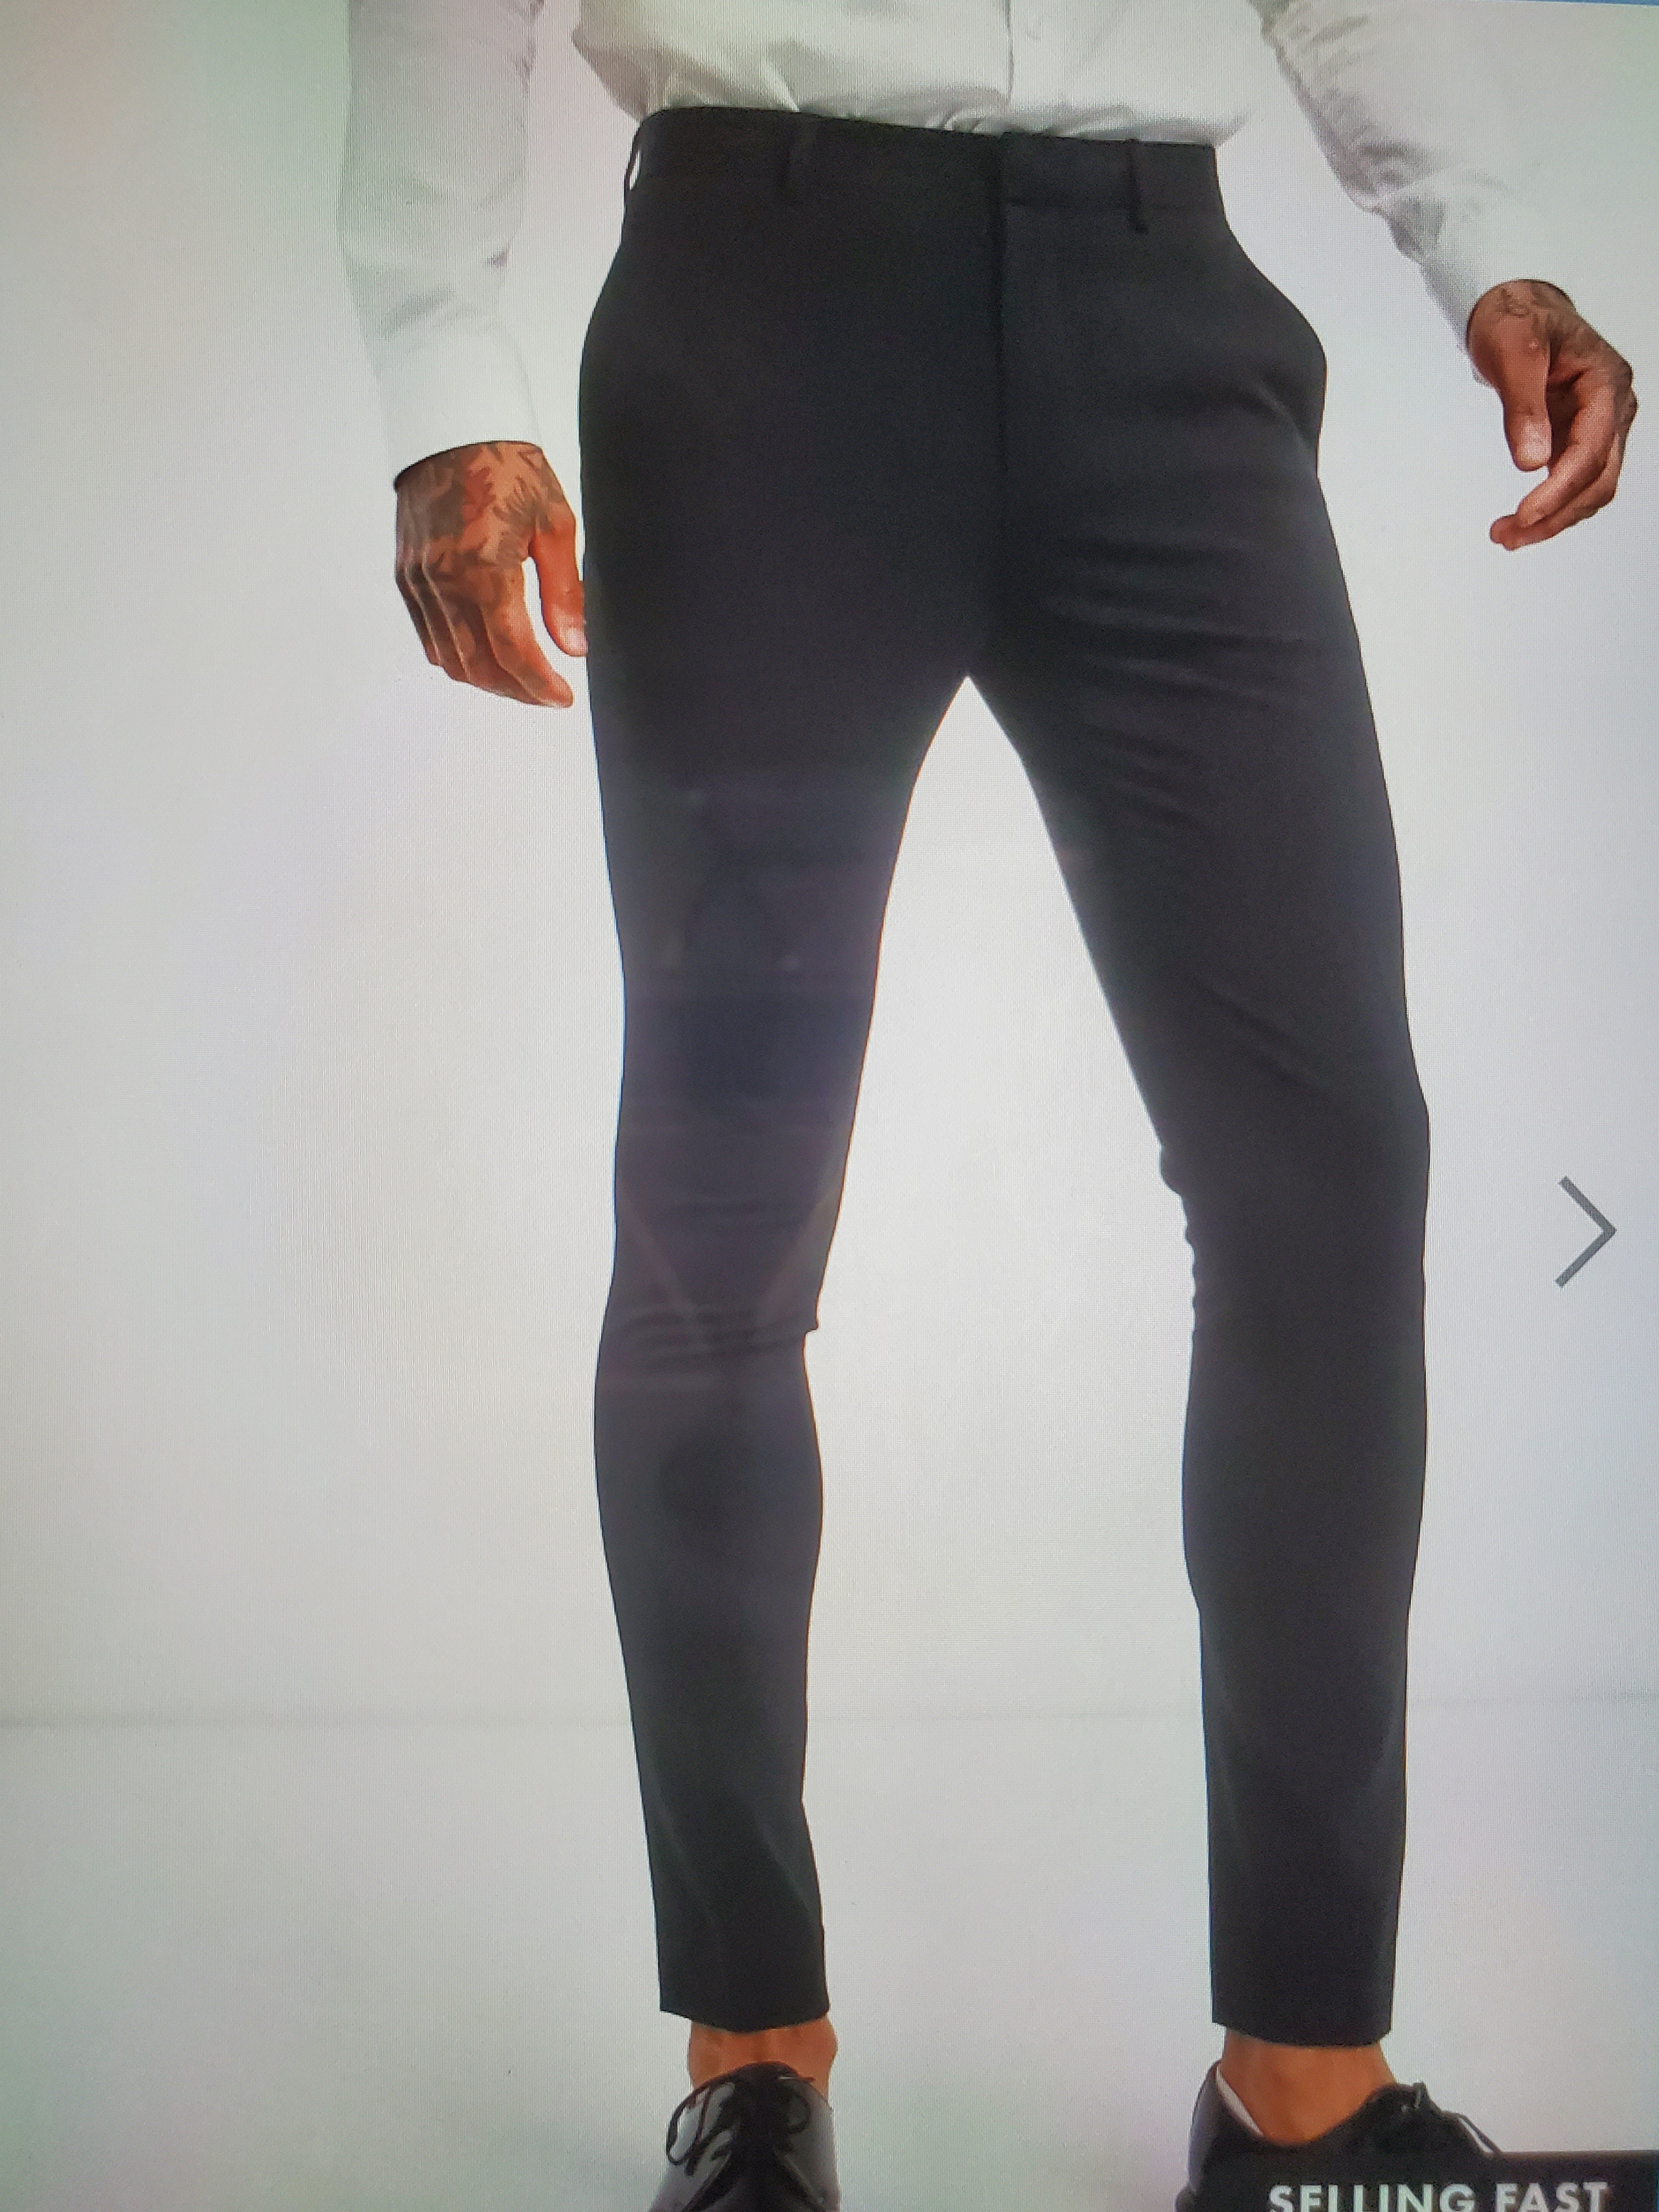 Trousers: Buy Trousers Starts Rs:199 Online at Best Prices in India | Free  Shipping